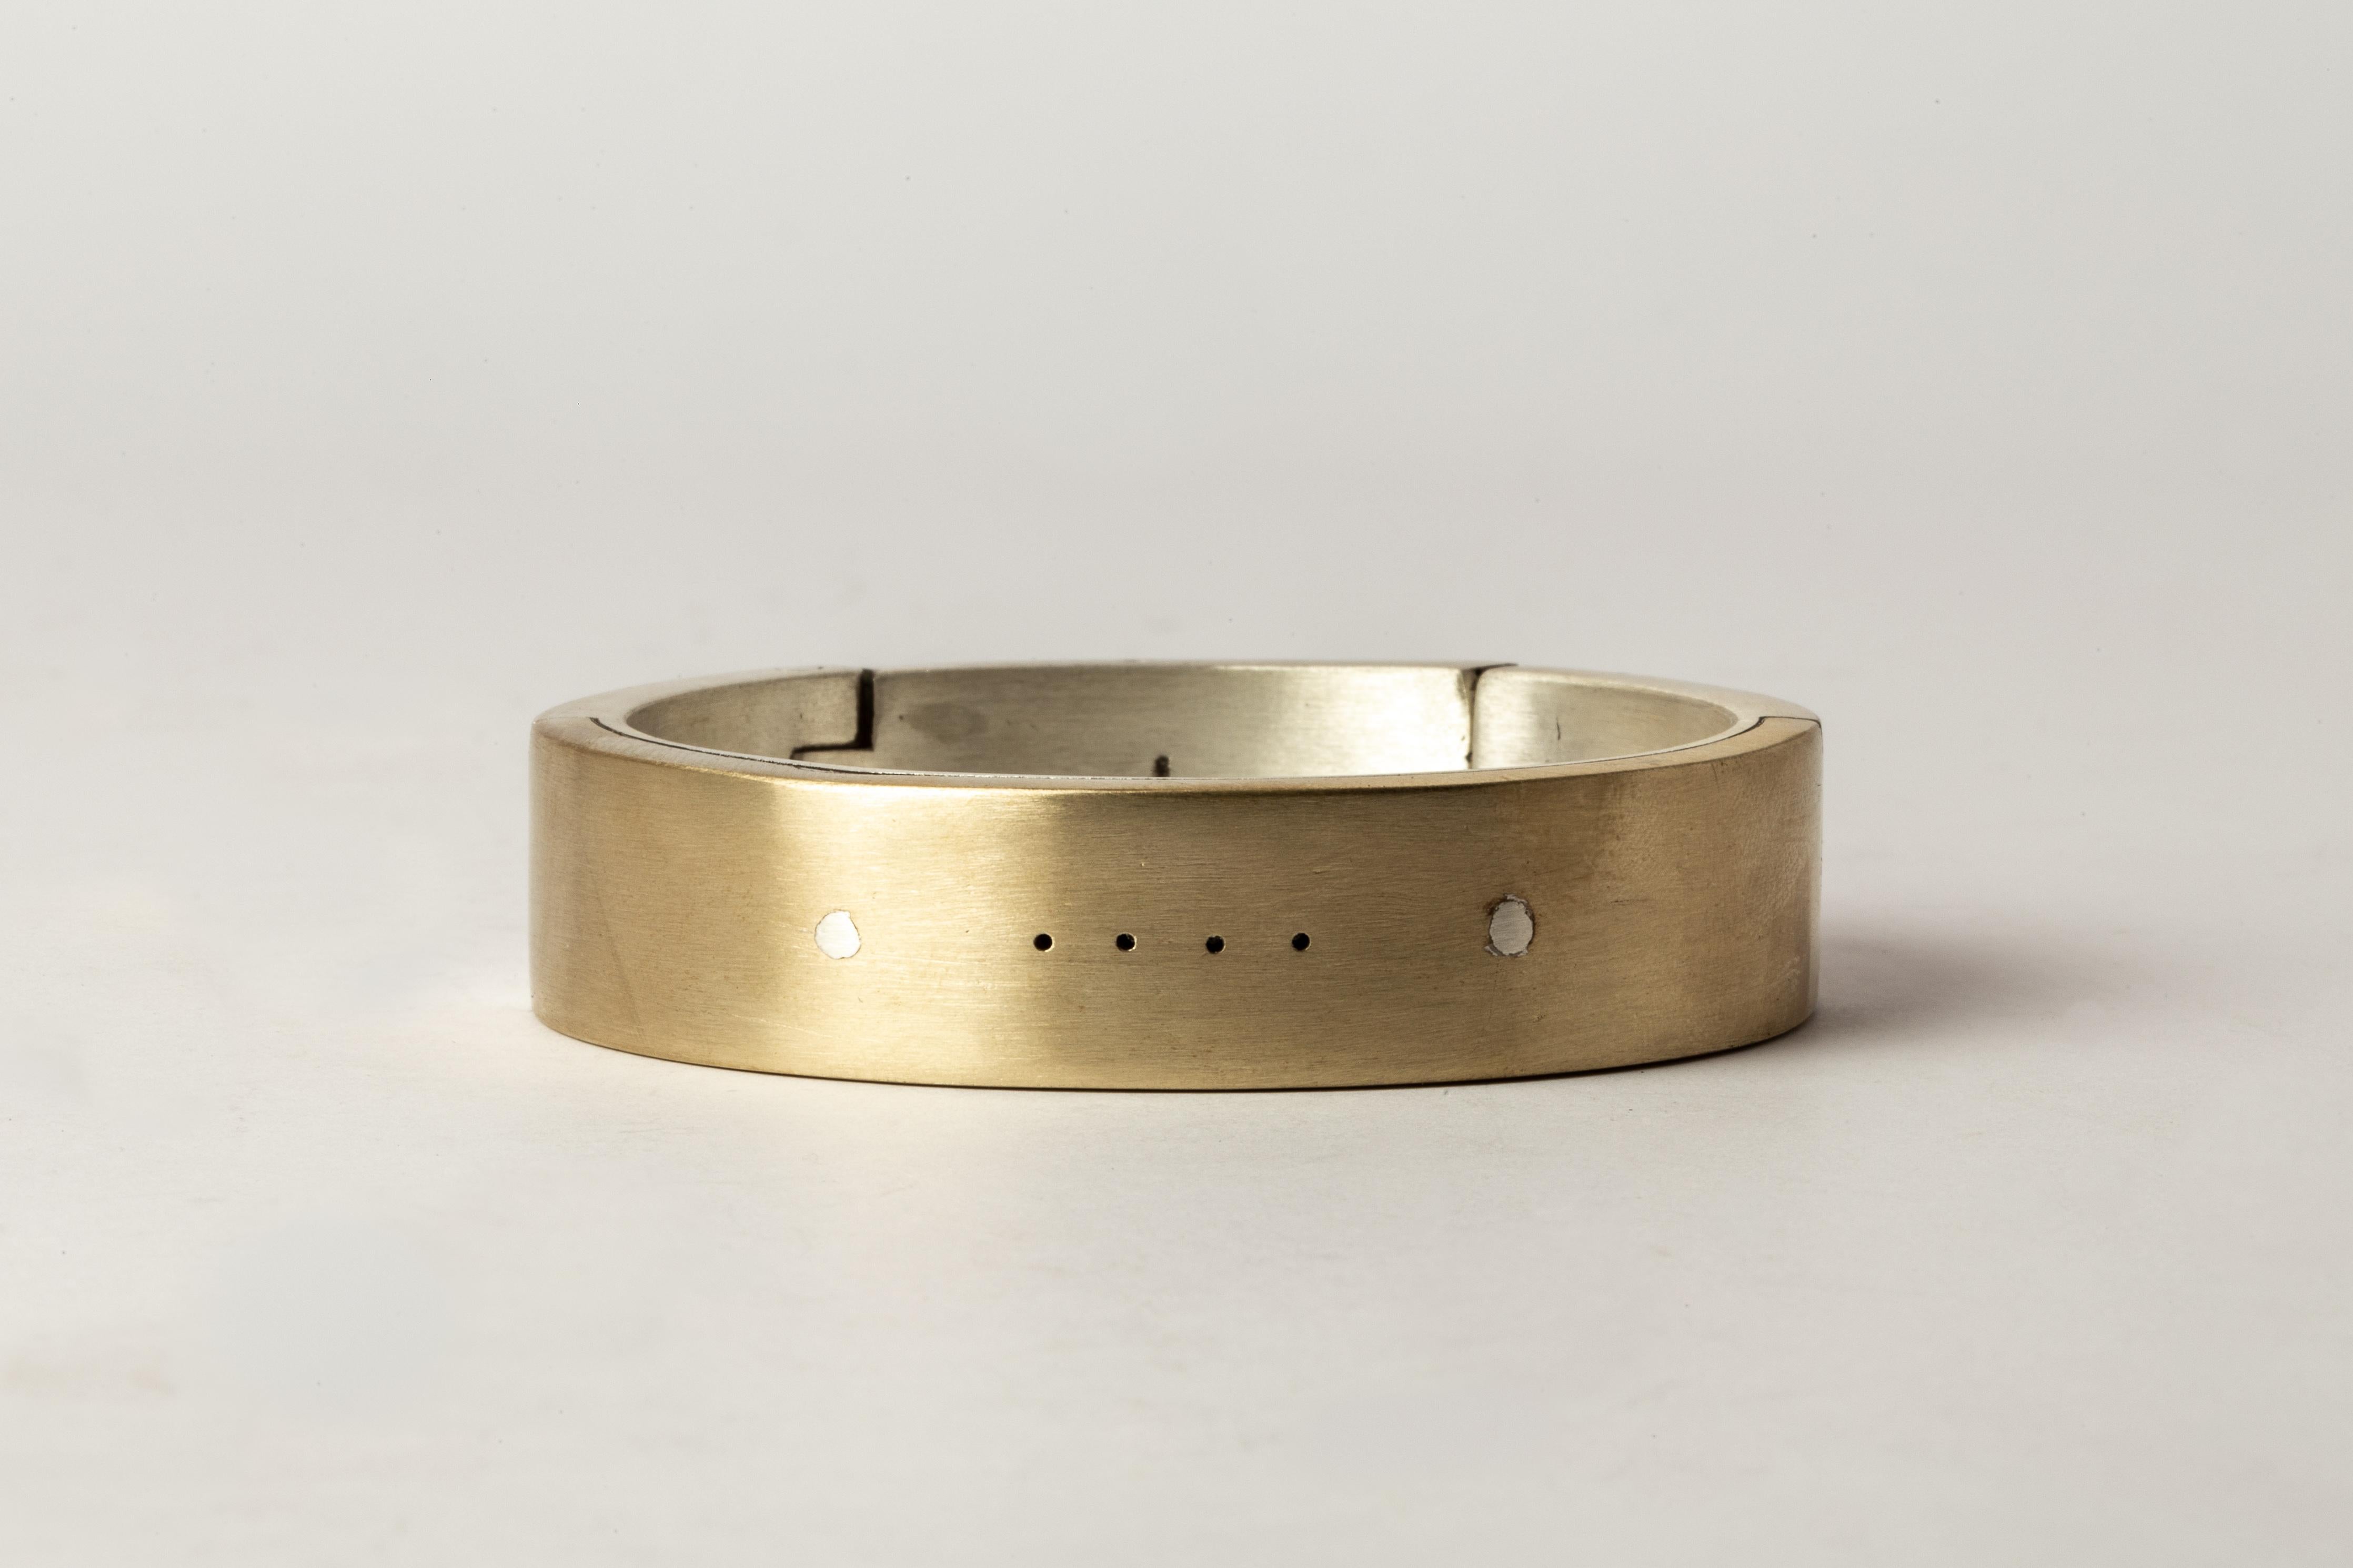 Sistema Bracelet v3 (4-Hole, 17mm, MA+MR) In New Condition For Sale In Hong Kong, Hong Kong Island